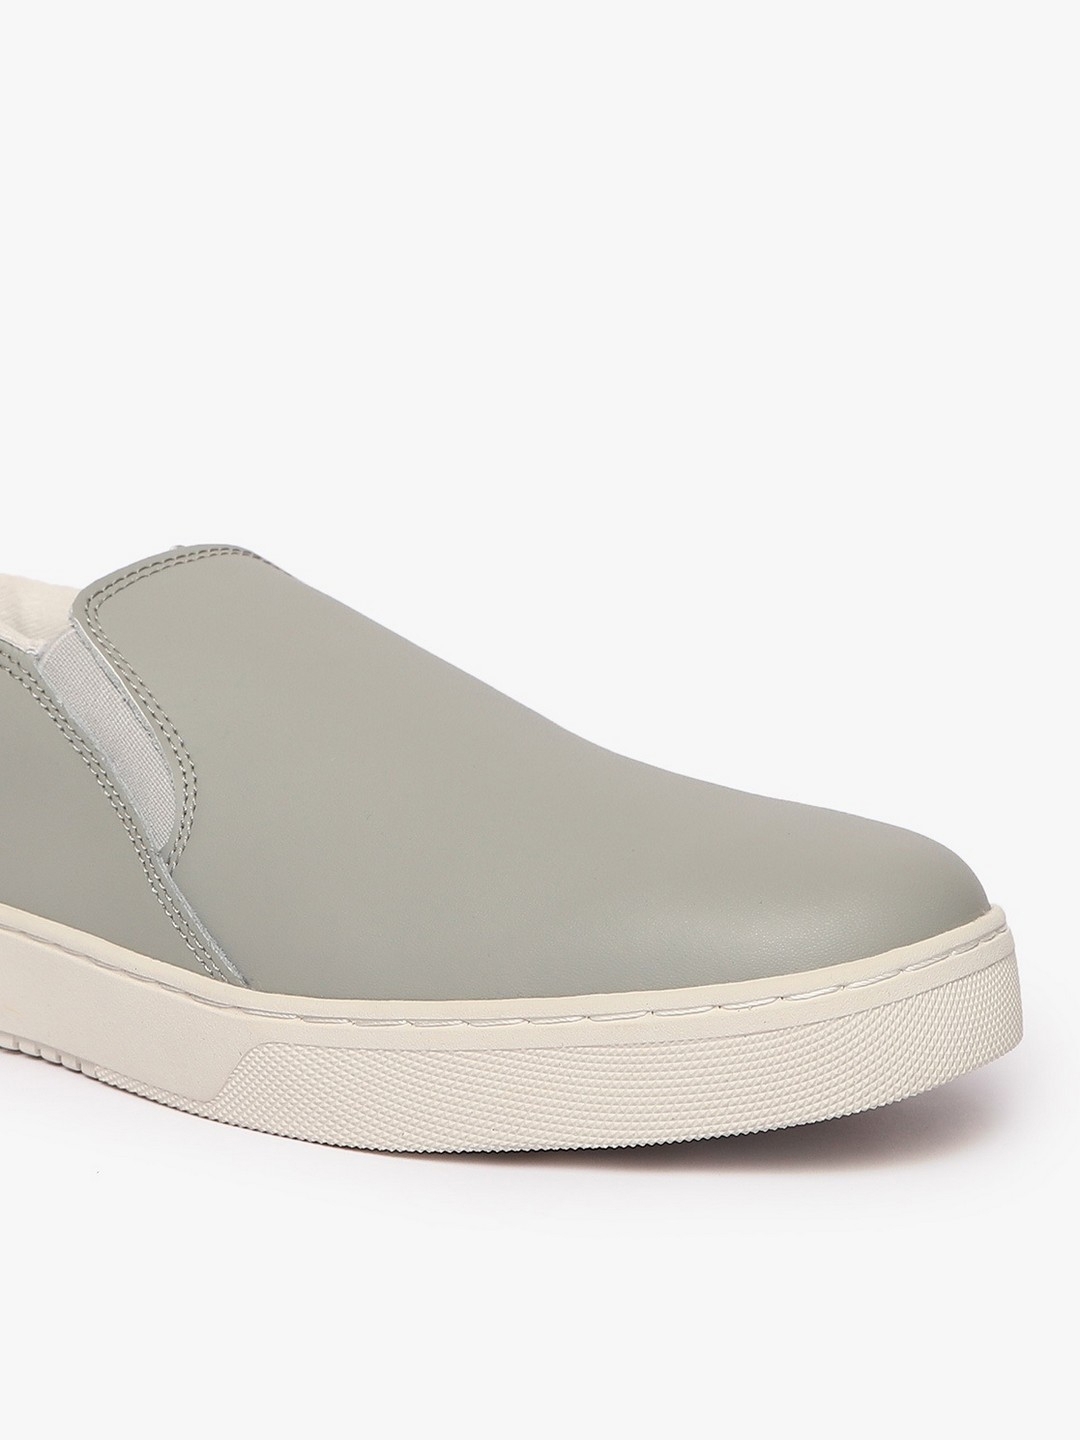 Low-Top Slip-On Casual Shoes